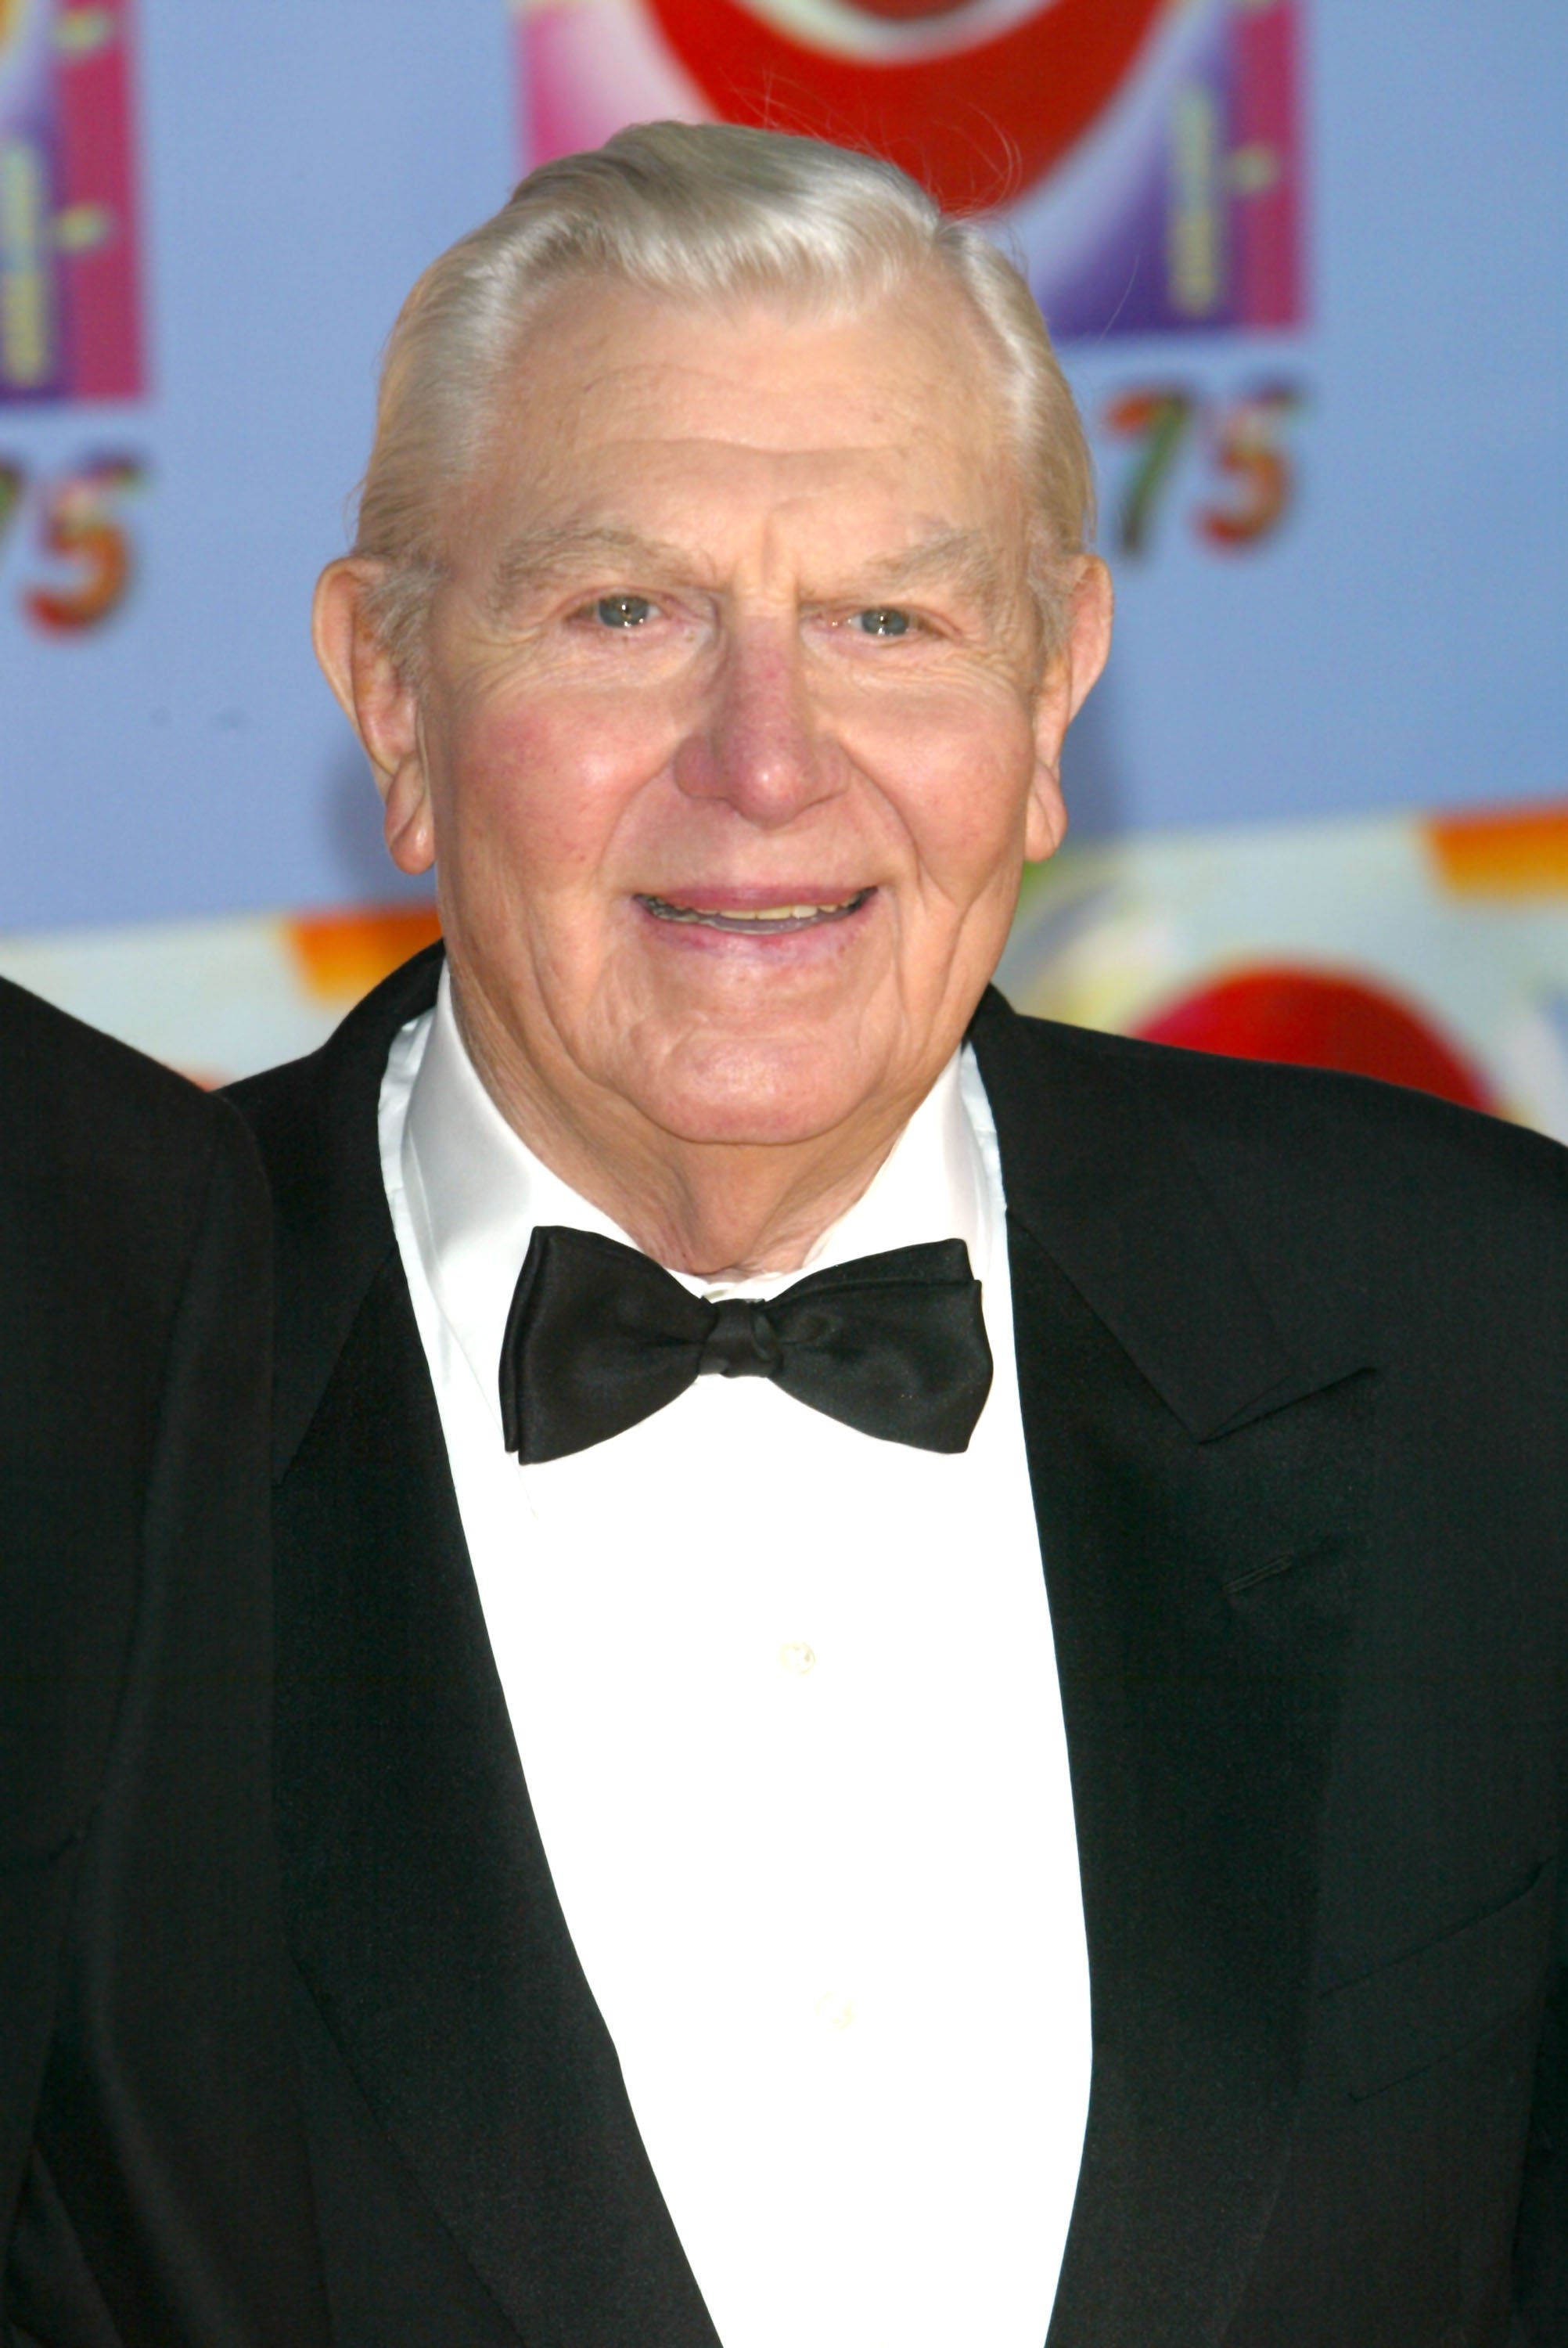  Andy Griffith arrives at the "CBS At 75" celebration November 2, 2003 ,in New York City. | Source: Getty Images.